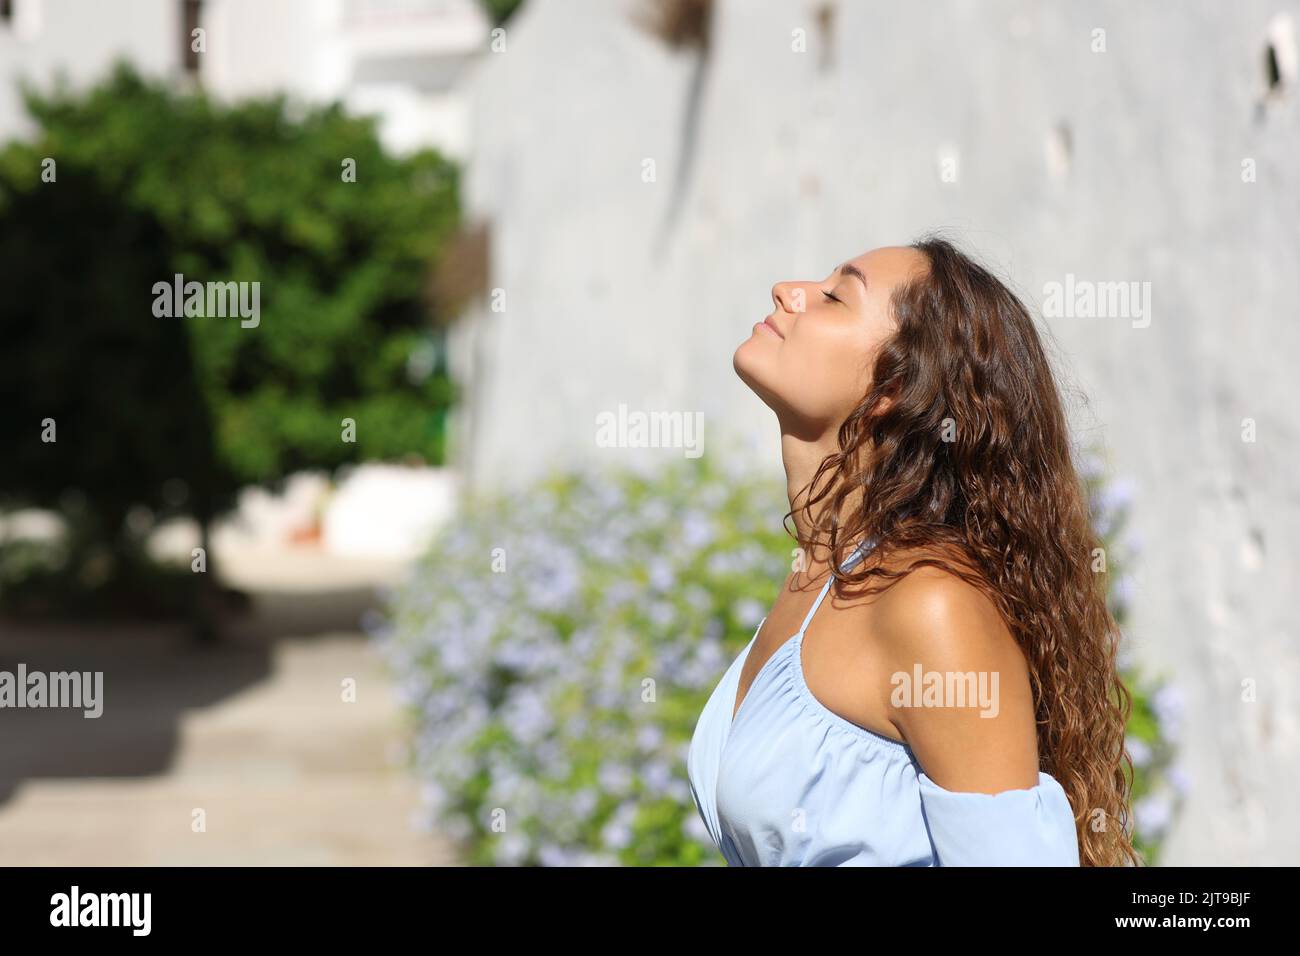 Side view portrait of a woman breathing fresh air in a white town street Stock Photo